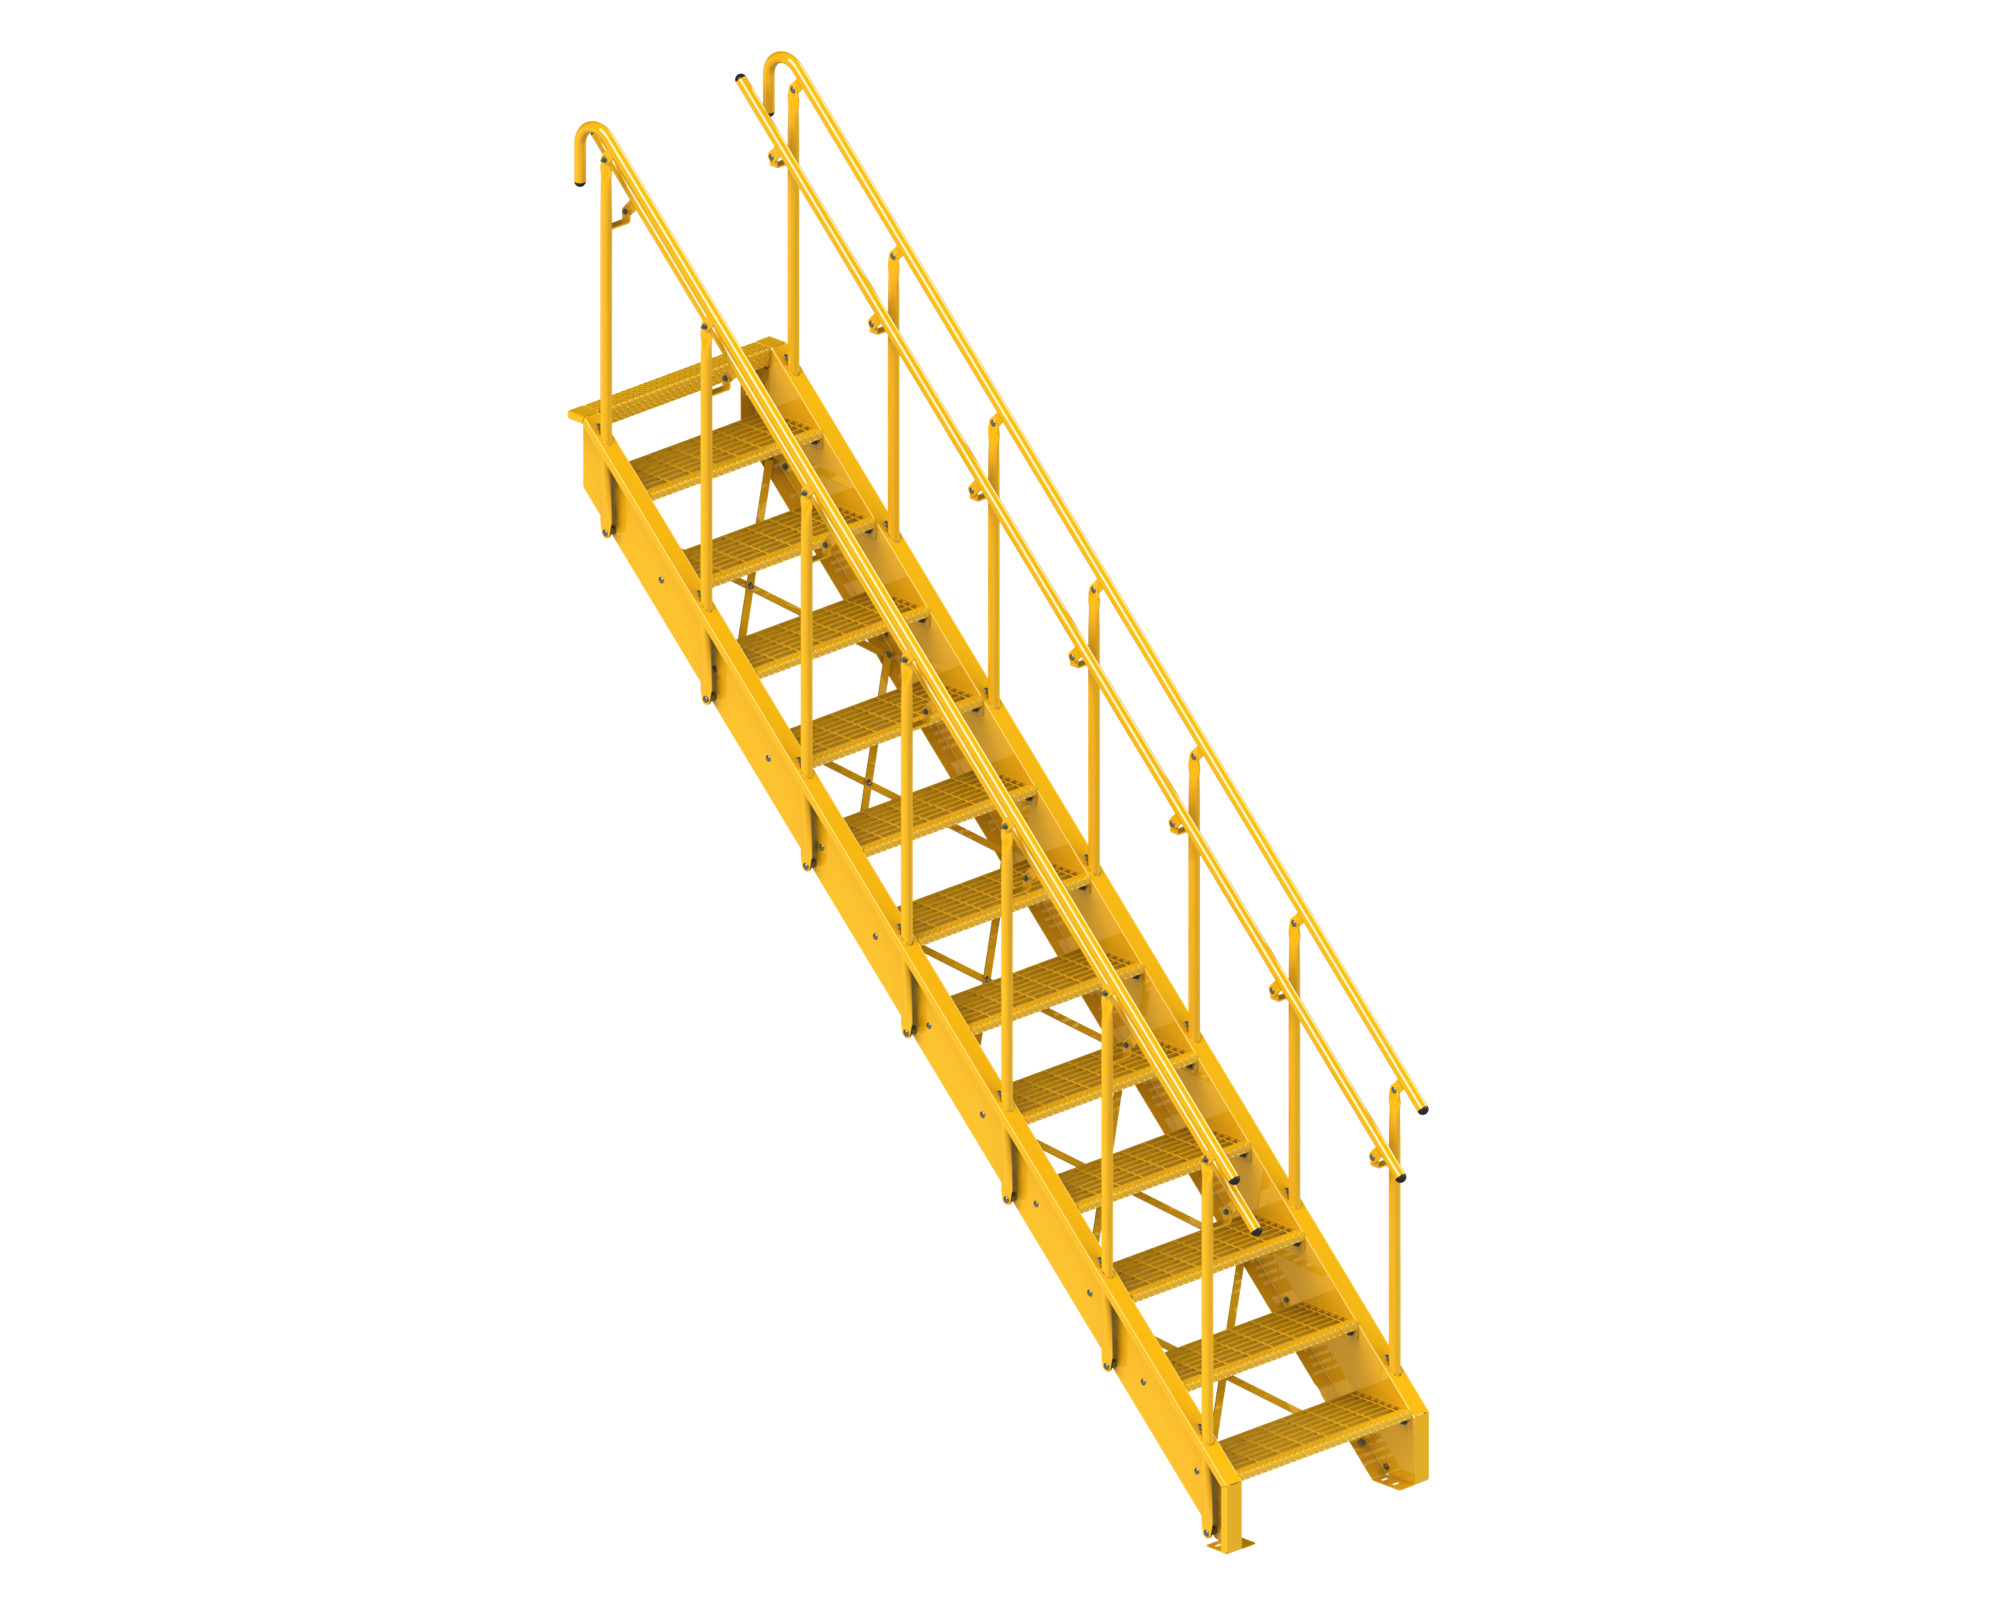 Industrial Stairs, Steel, Safety Yellow, Bar Grating, OSHA